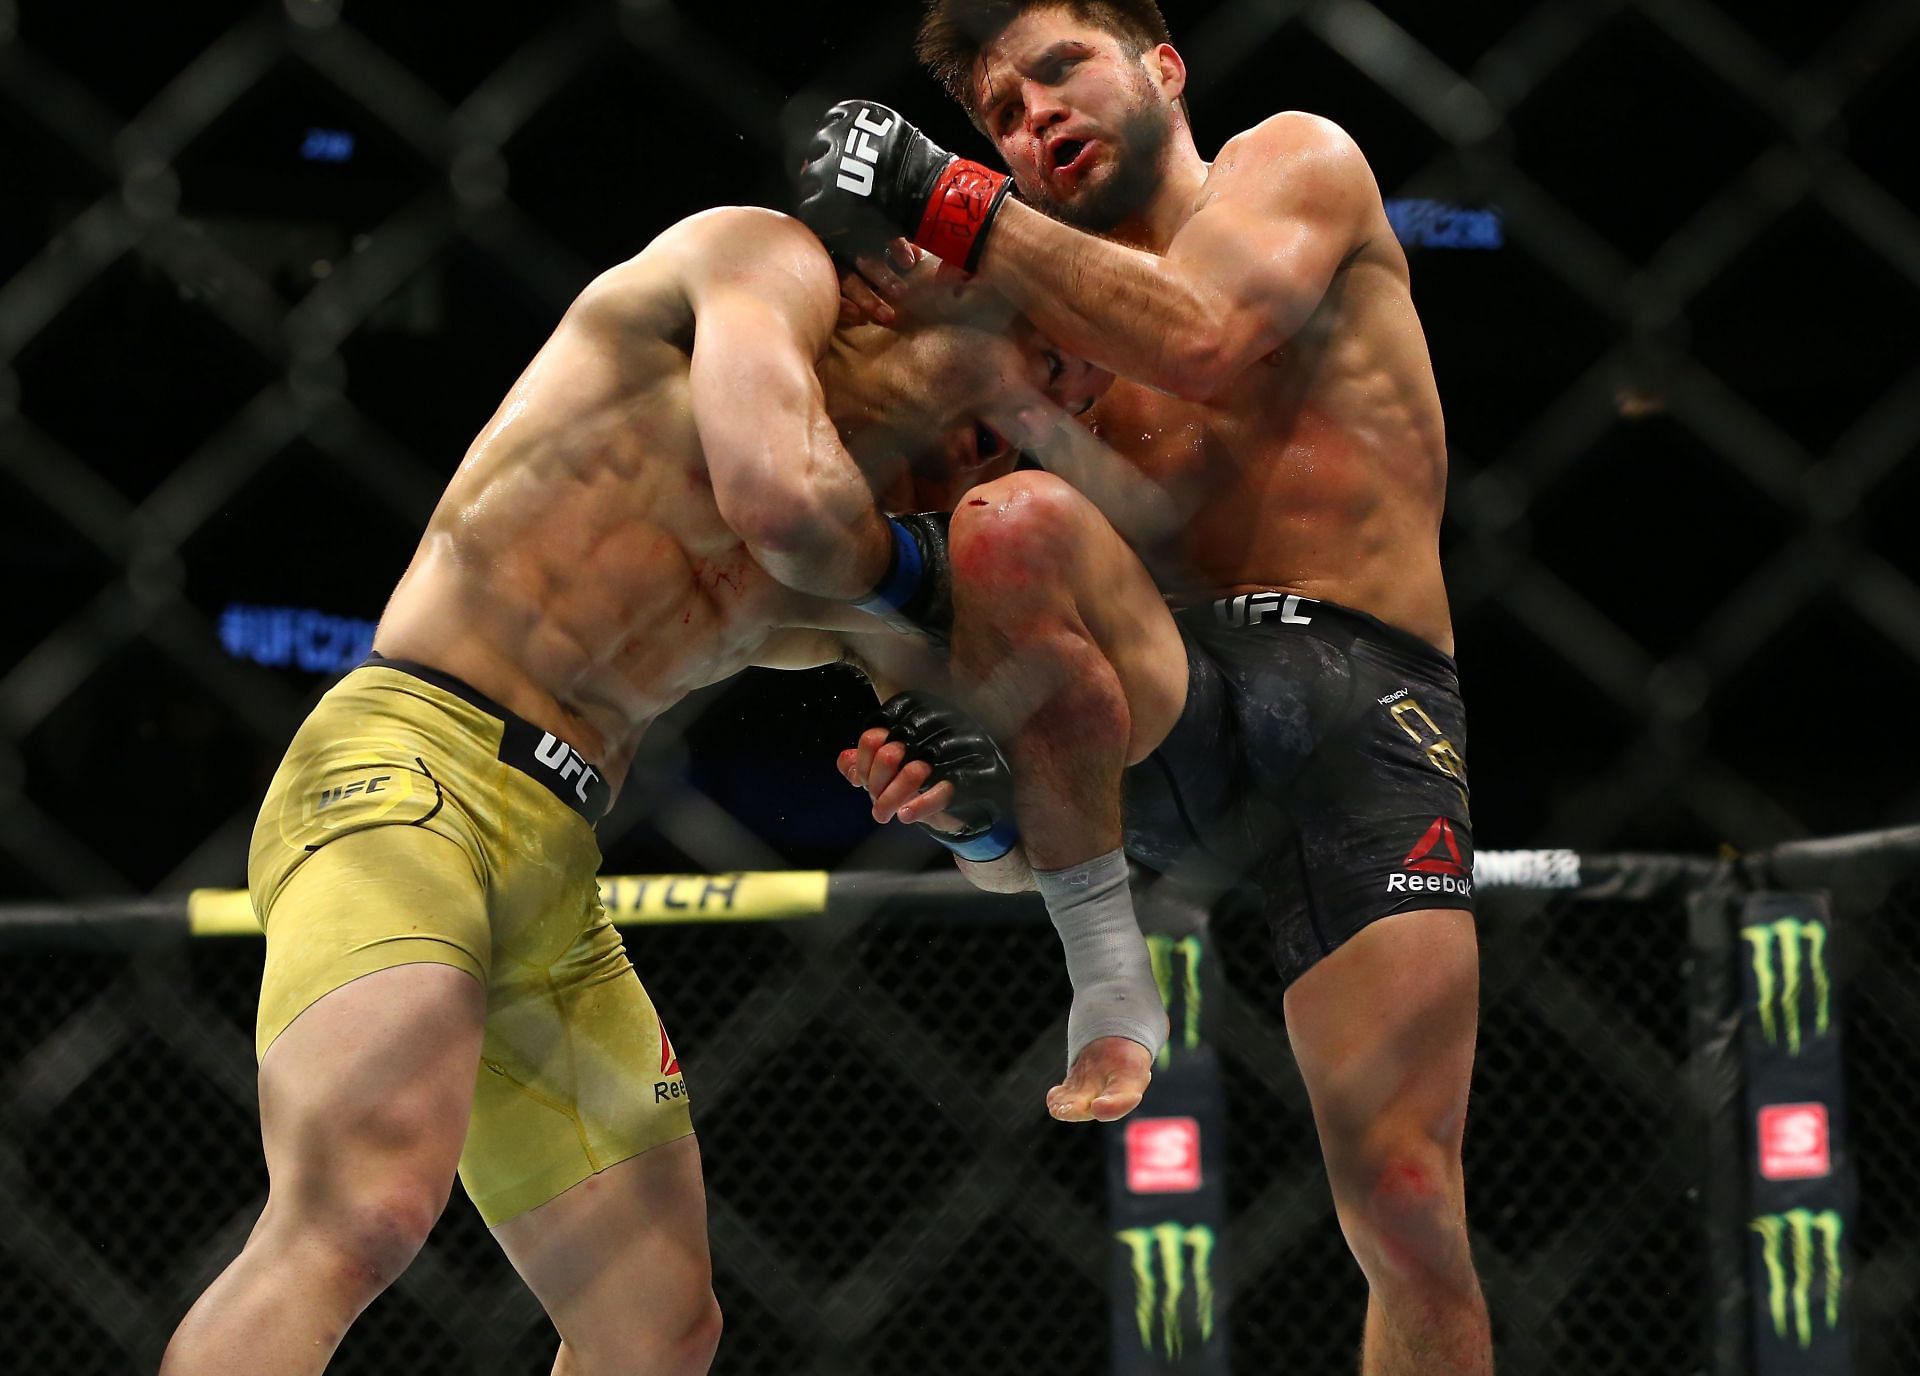 Henry Cejudo carries heavy power in his strikes